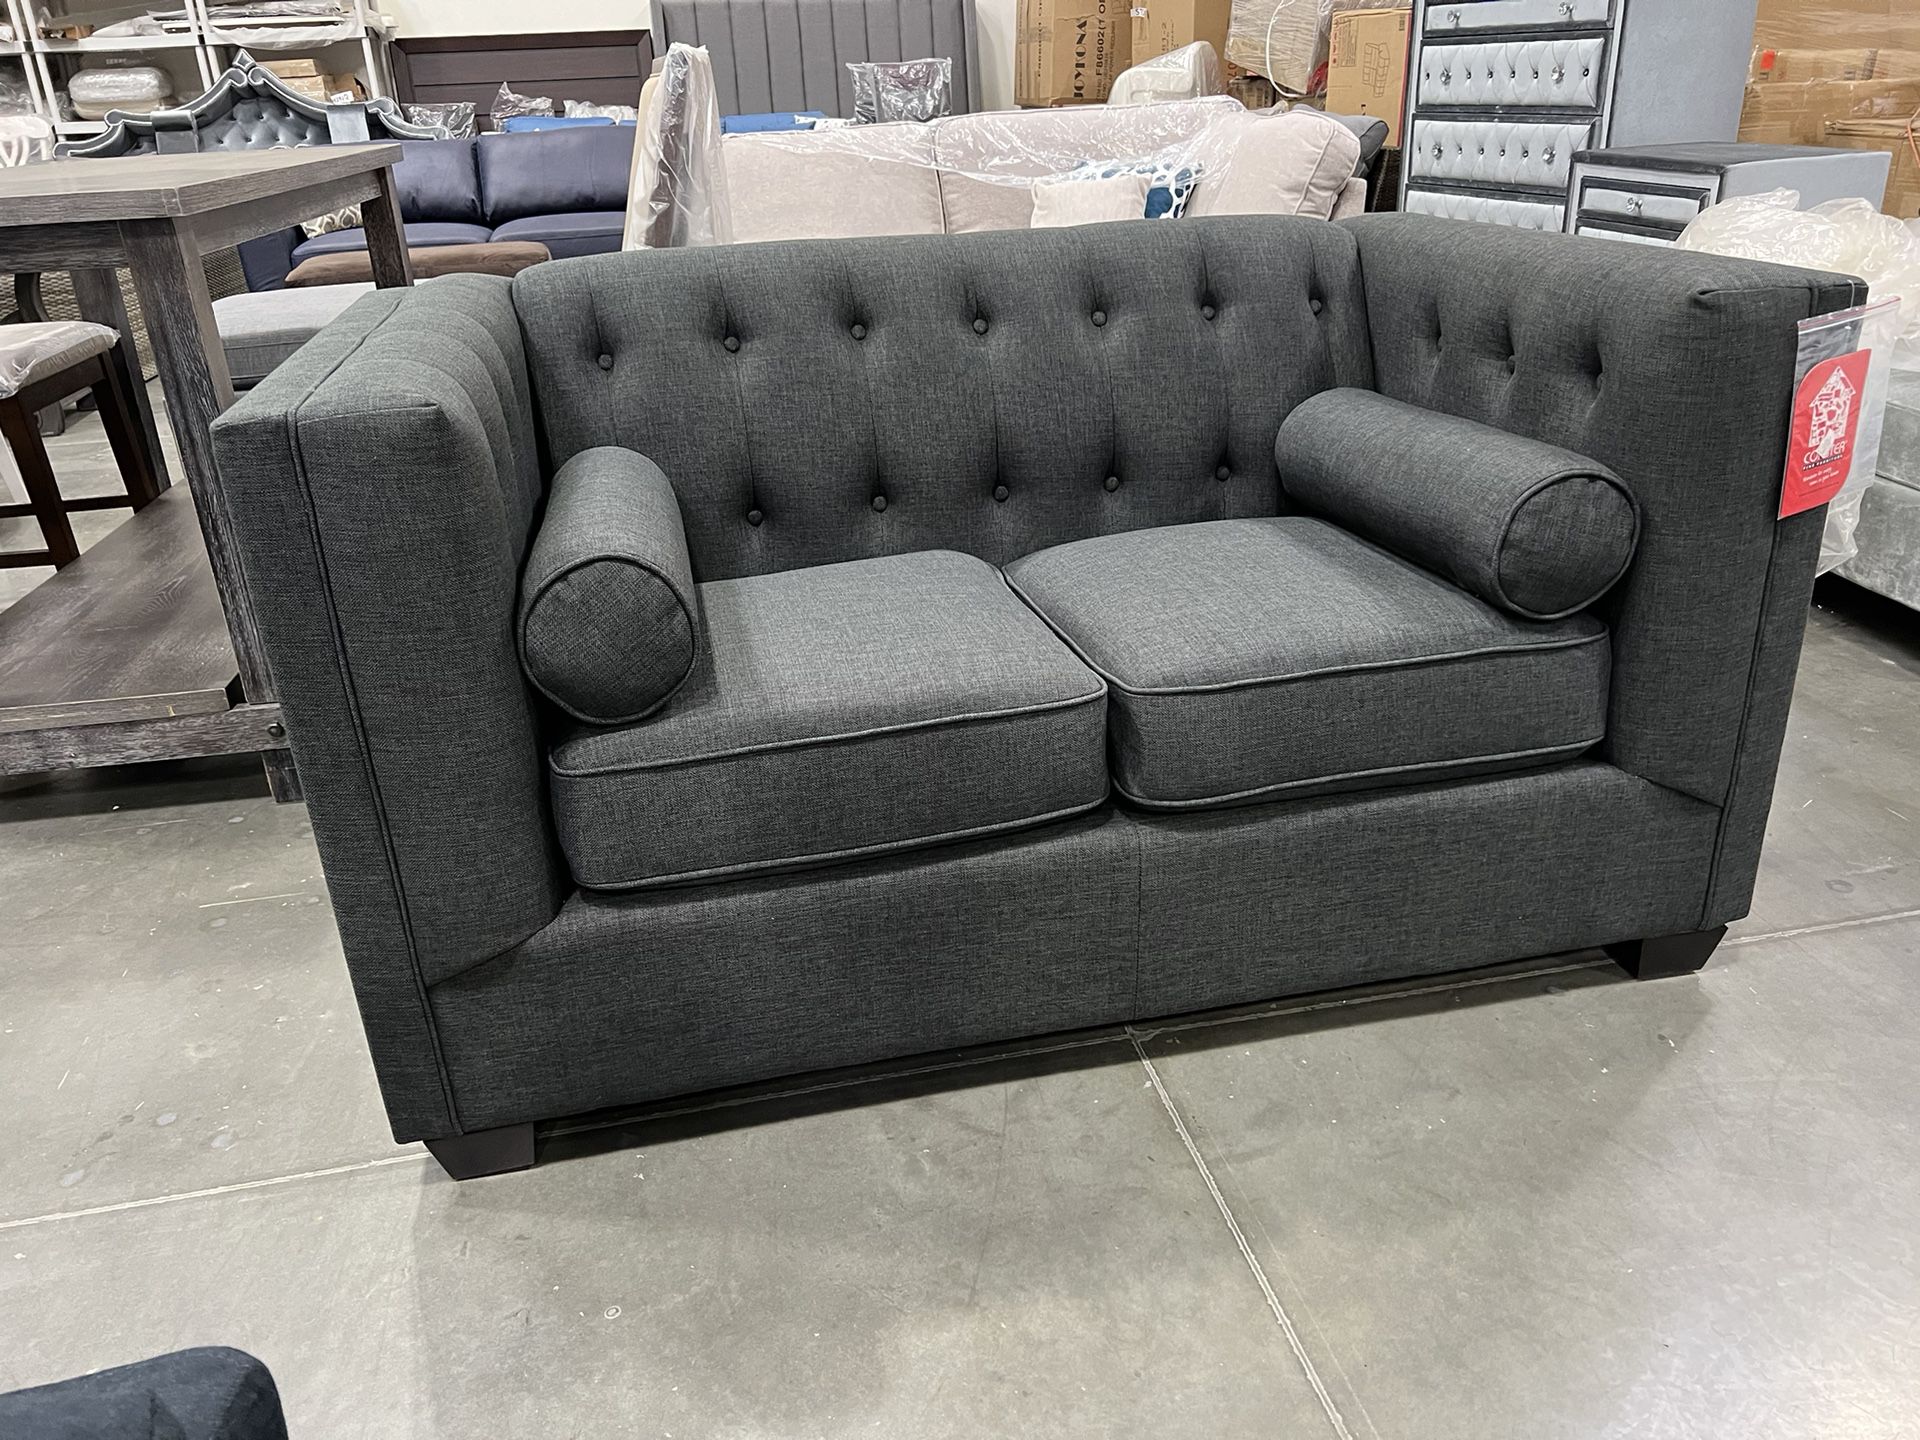 !New! Beautiful Charcoal Linen-like Upholstery, Grey Couch, Tuxedo Loveseat, Tufted Design Sofa, Couch, Loveseat Perfect For Small Living Room